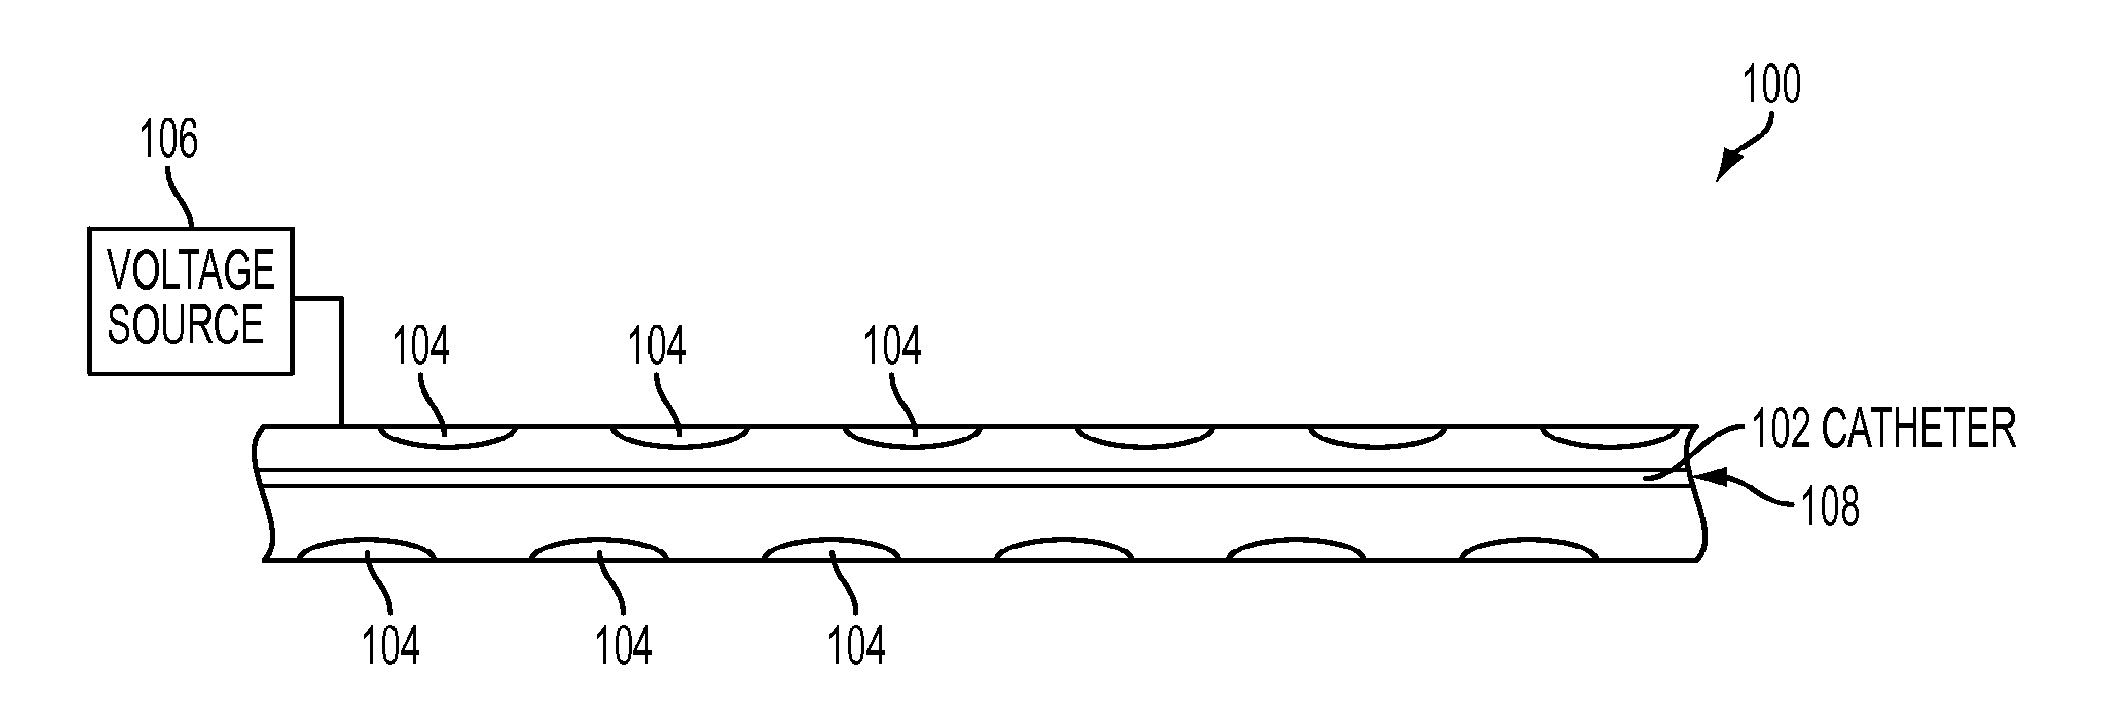 Catheter/Stent System For Activation of Photodynamic Therapy Within The Catheter/Stent System